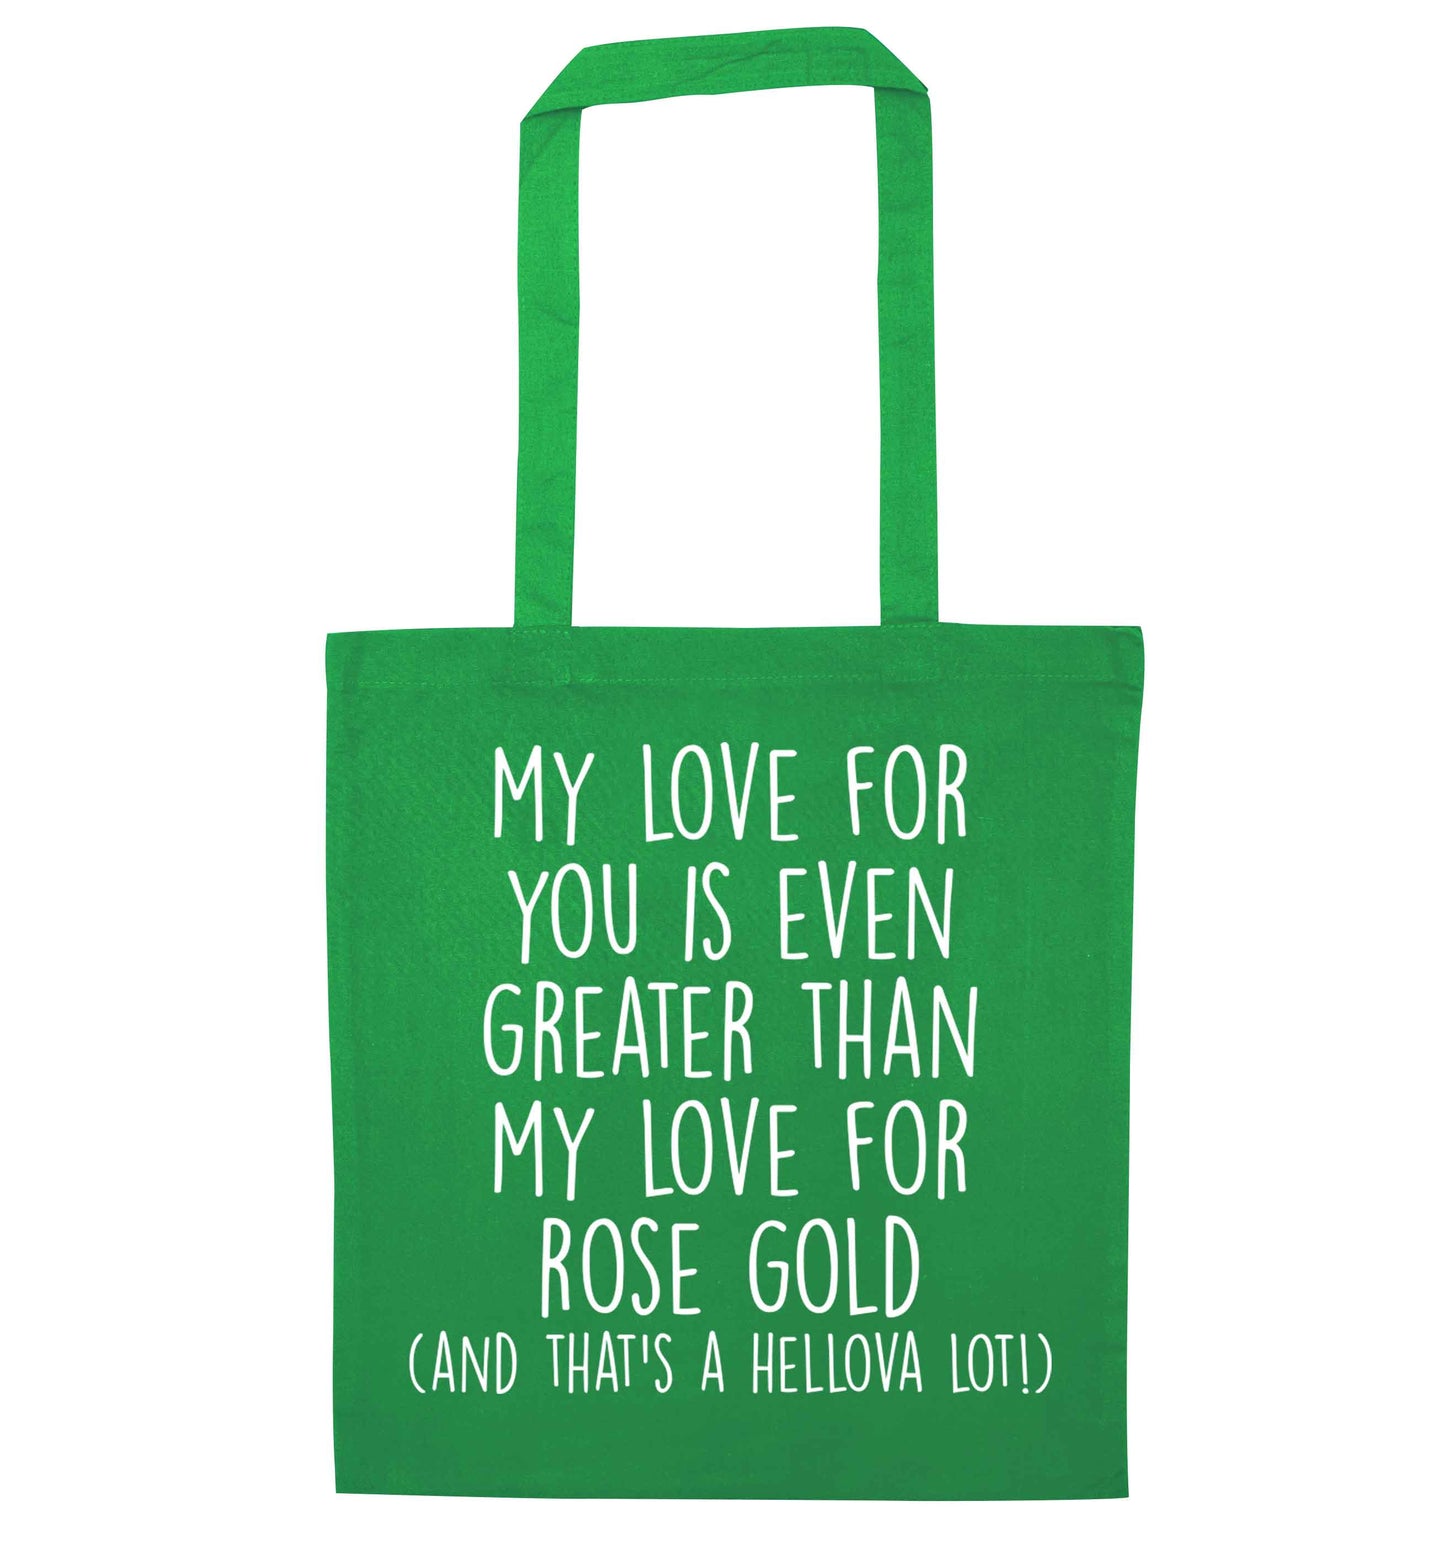 My love for you is even greater than my love for rose gold (and that's a hellova lot) green tote bag